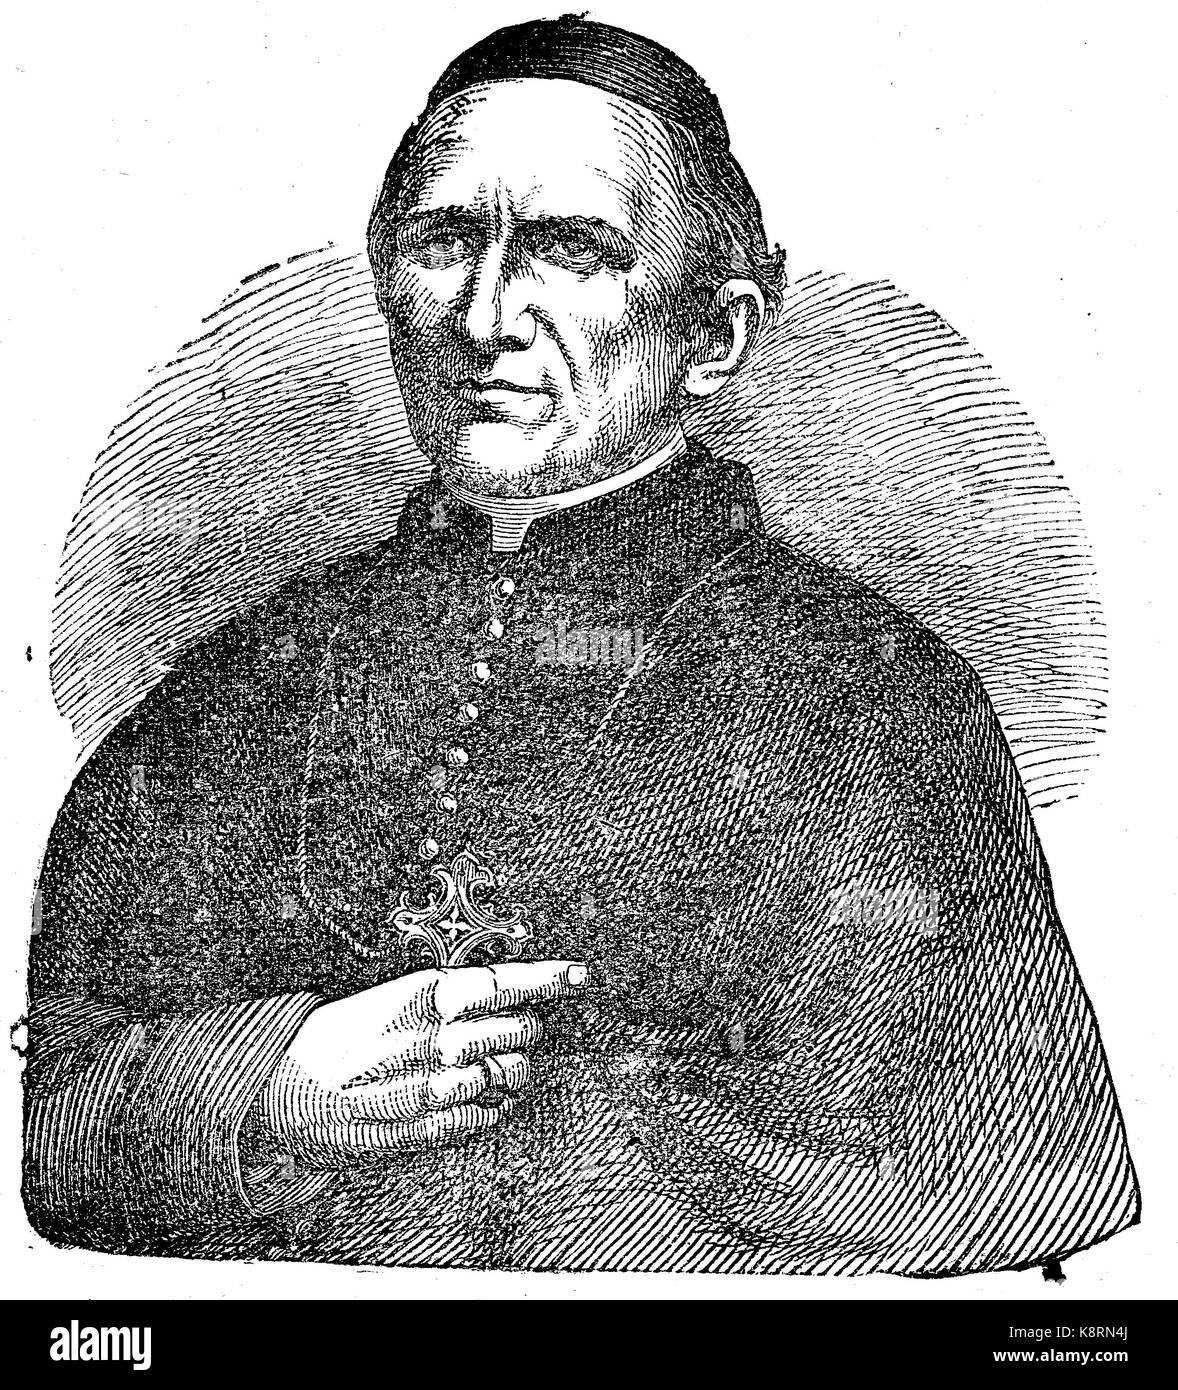 Paul Melchers,1813 - 1895 was a Cardinal and Archbishop of Cologne, digital improved reproduction of a woodcut, published in the 19th century Stock Photo